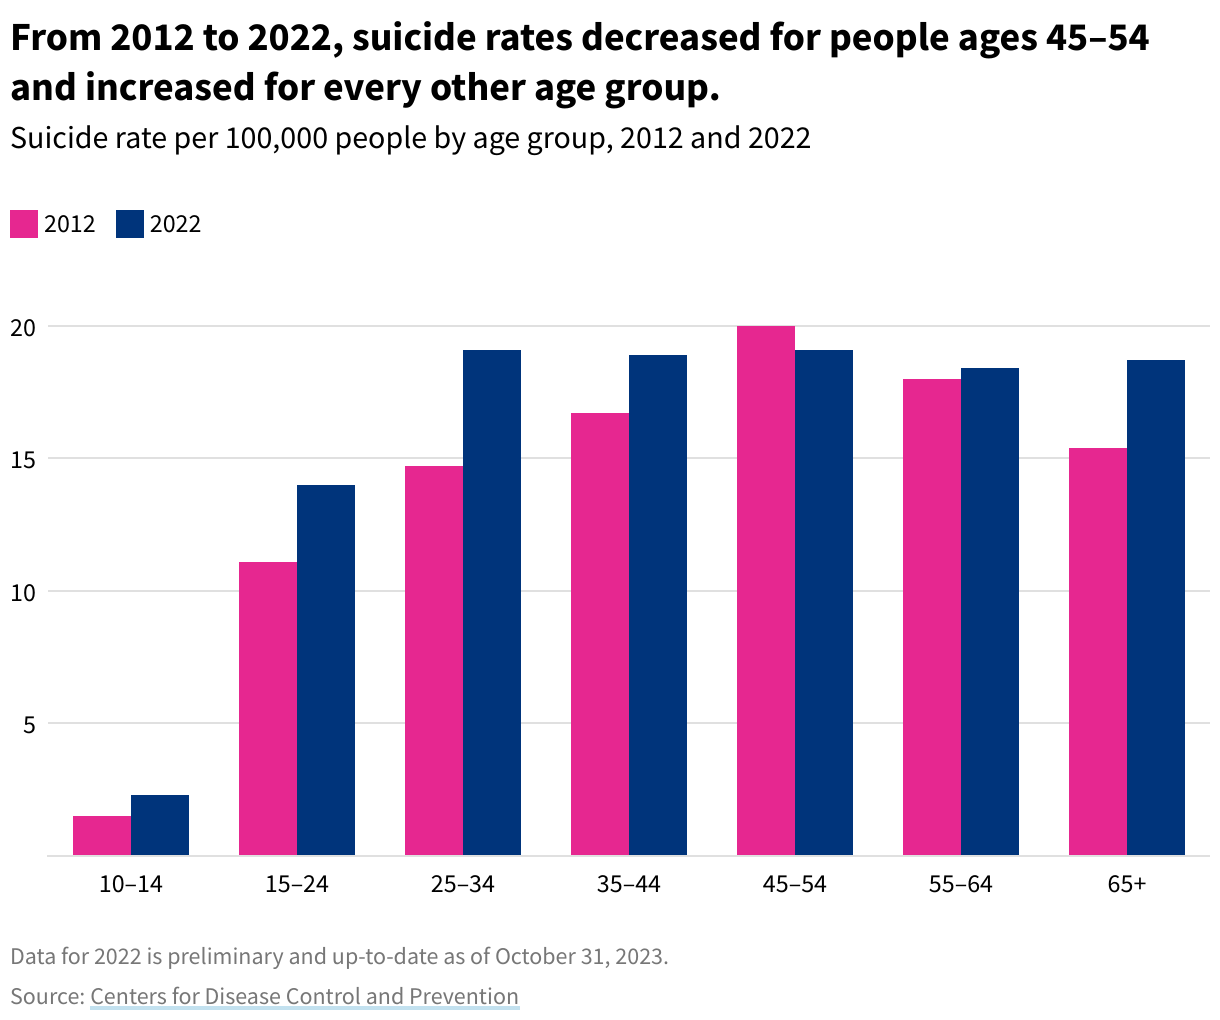 Bar graph showing suicide rate per 100,000 people by age group, comparing 2012 to 2022. From 2012 to 2022, suicide rates decreased for people ages 45–54 and increased for every other age group.